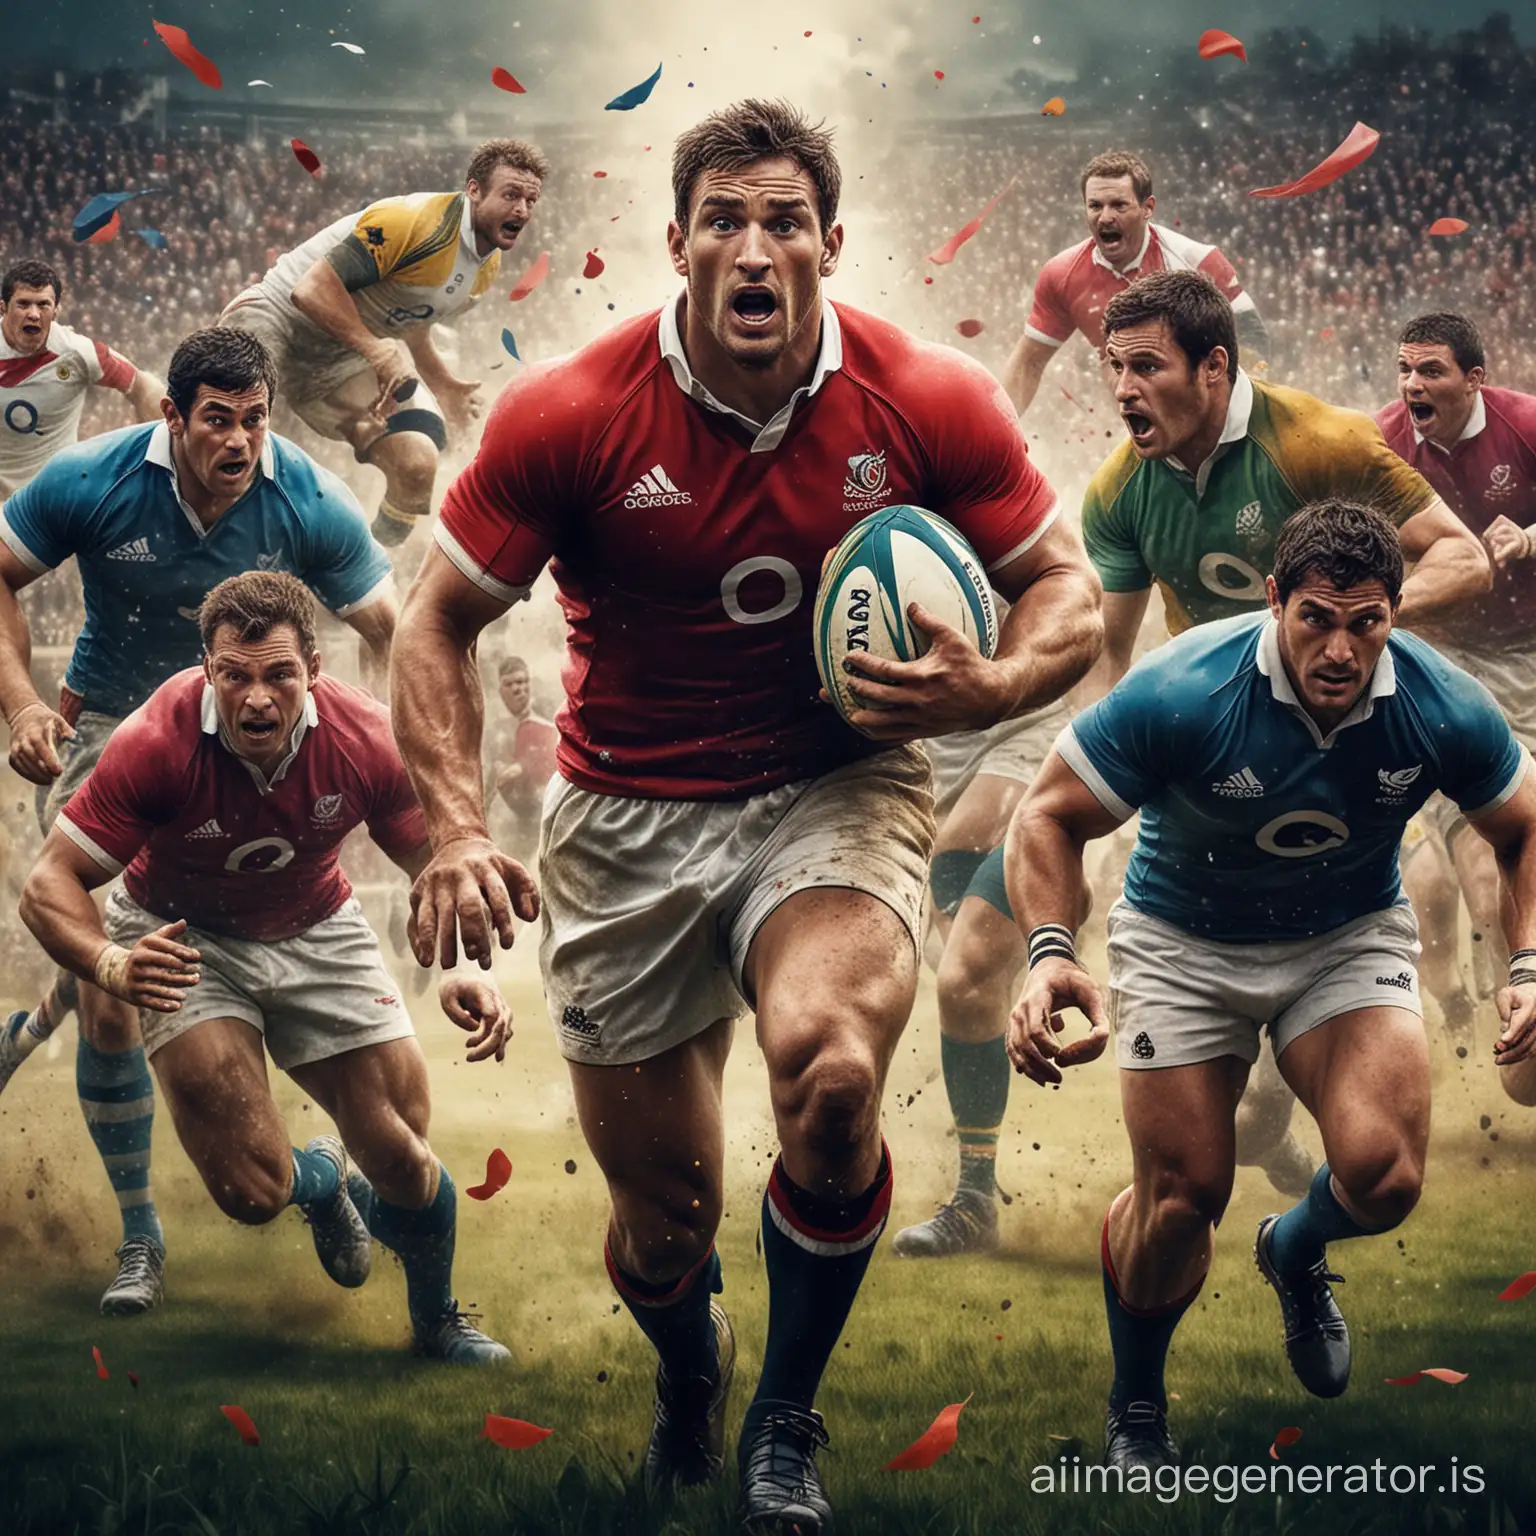 Inspiring-Movie-Poster-The-Art-of-Rugby-Icons-Celebrate-Creativity